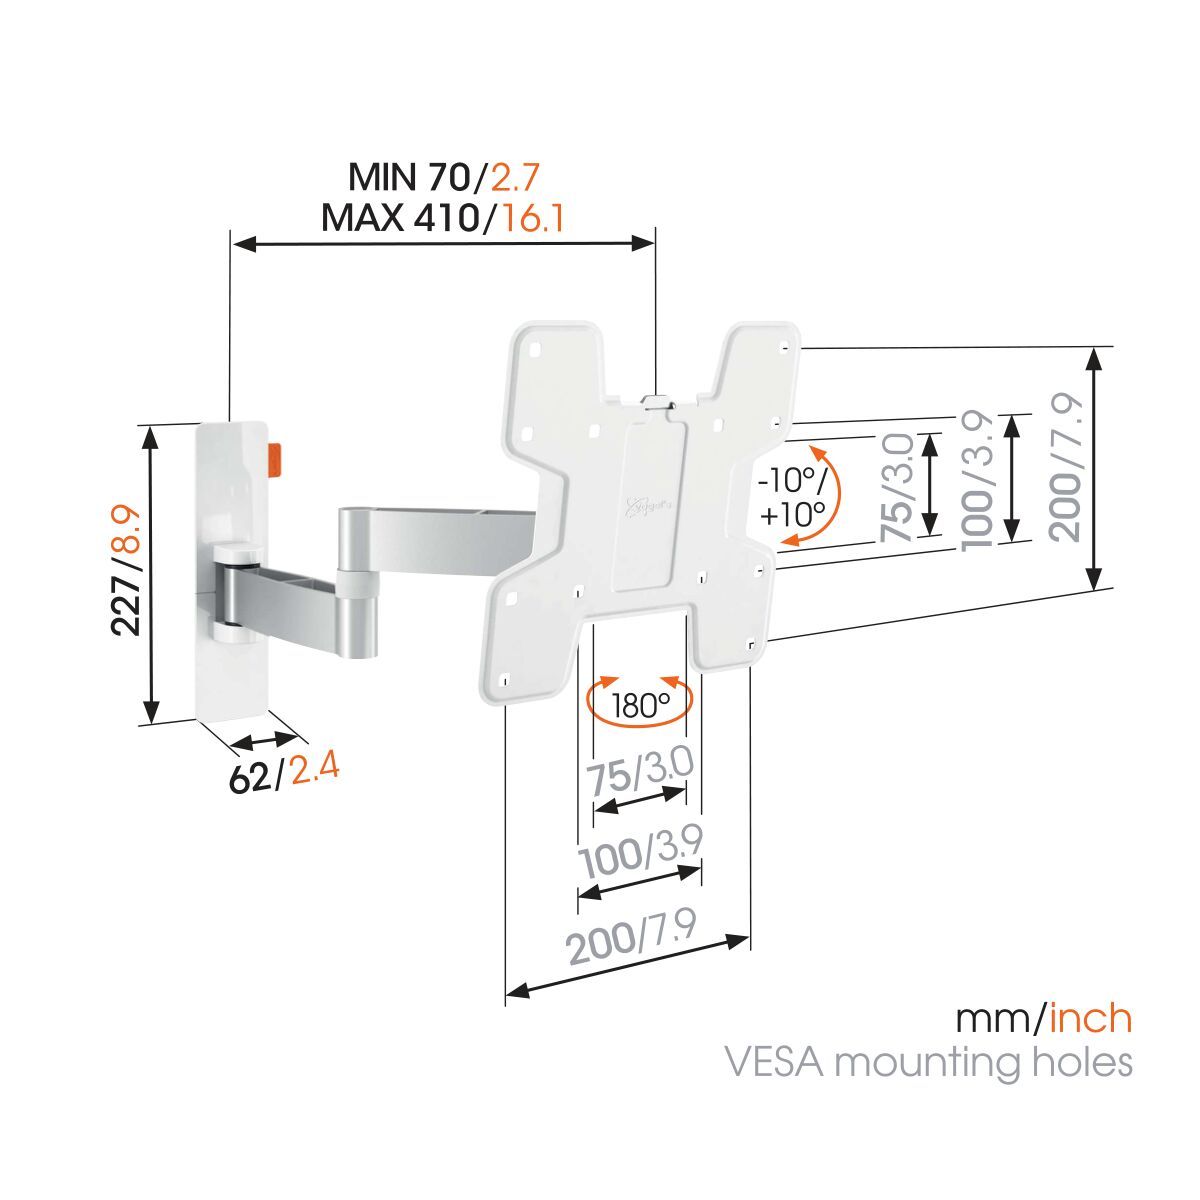 Vogel's WALL 3145 Full-Motion TV Wall Mount (white) - Suitable for 19 up to 43 inch TVs - Full motion (up to 180°) - Tilt -10°/+10° - Dimensions